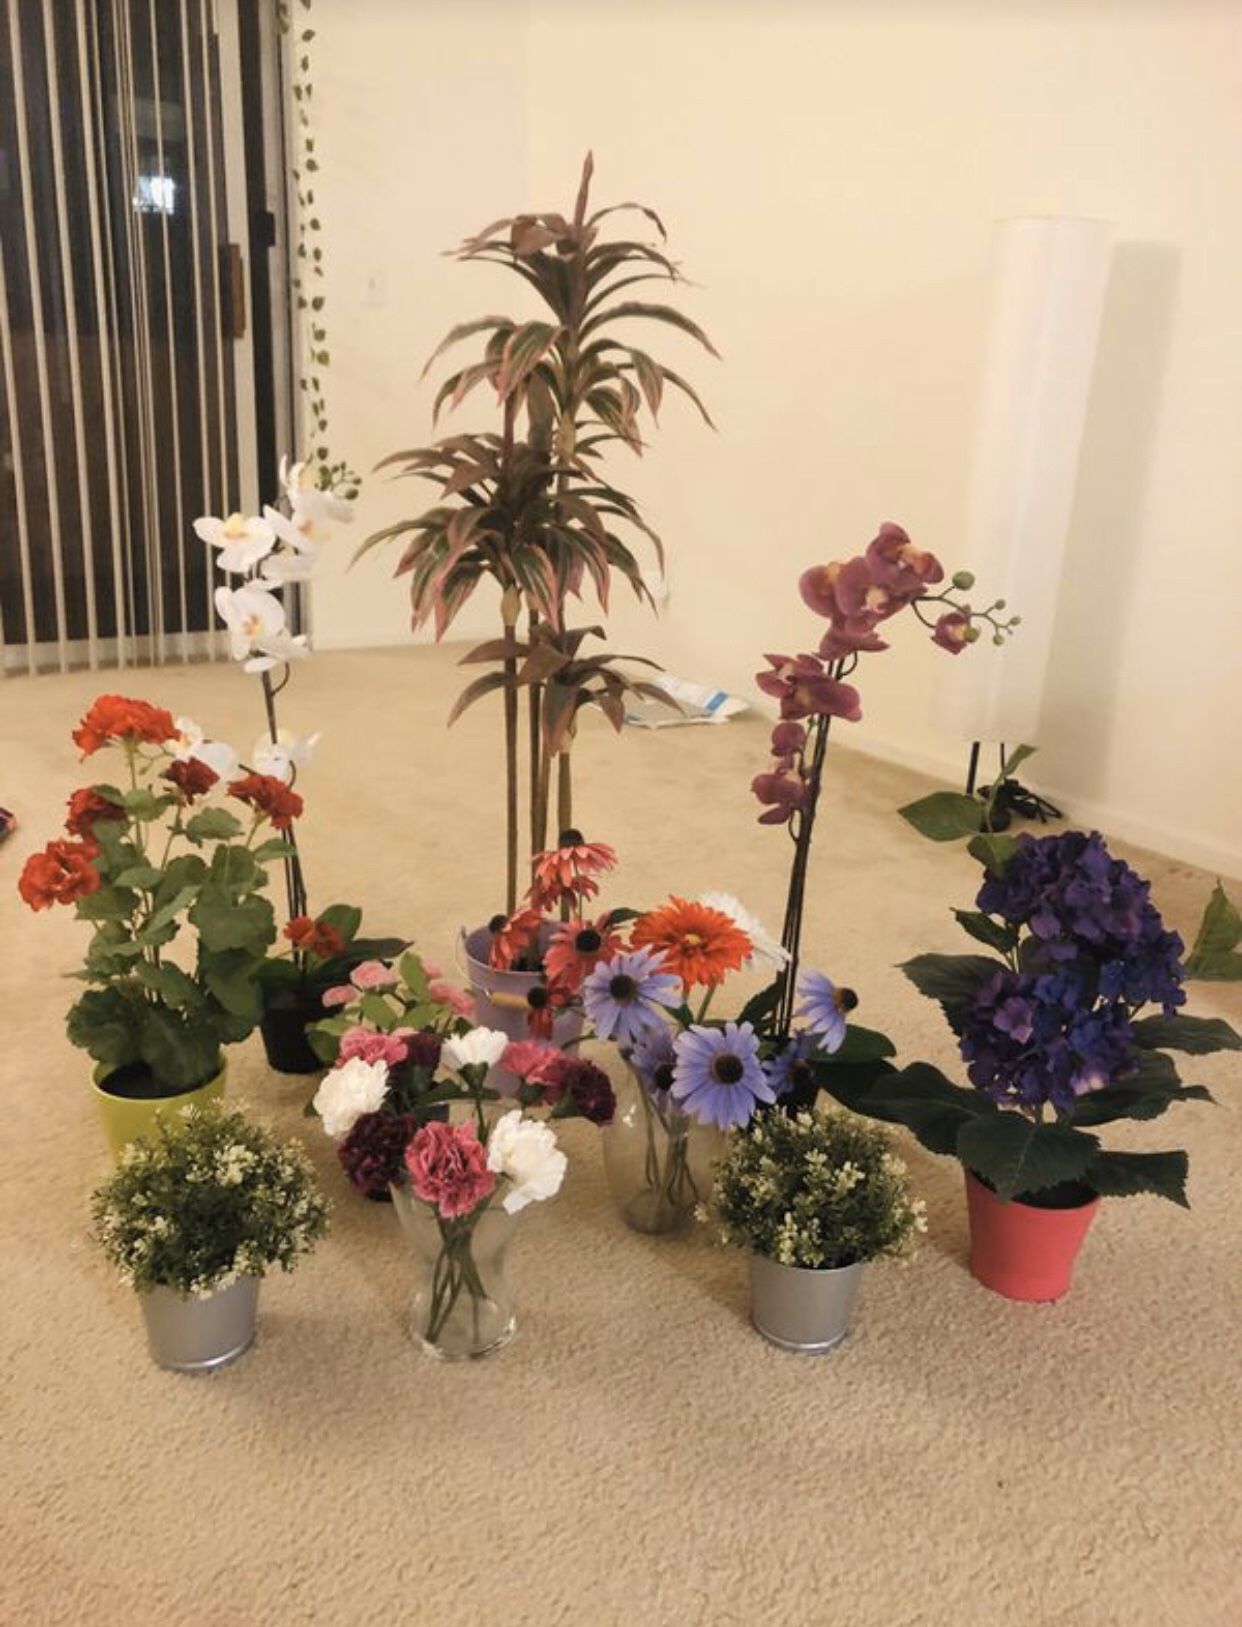 Artificial plants and flowers with pots and vases